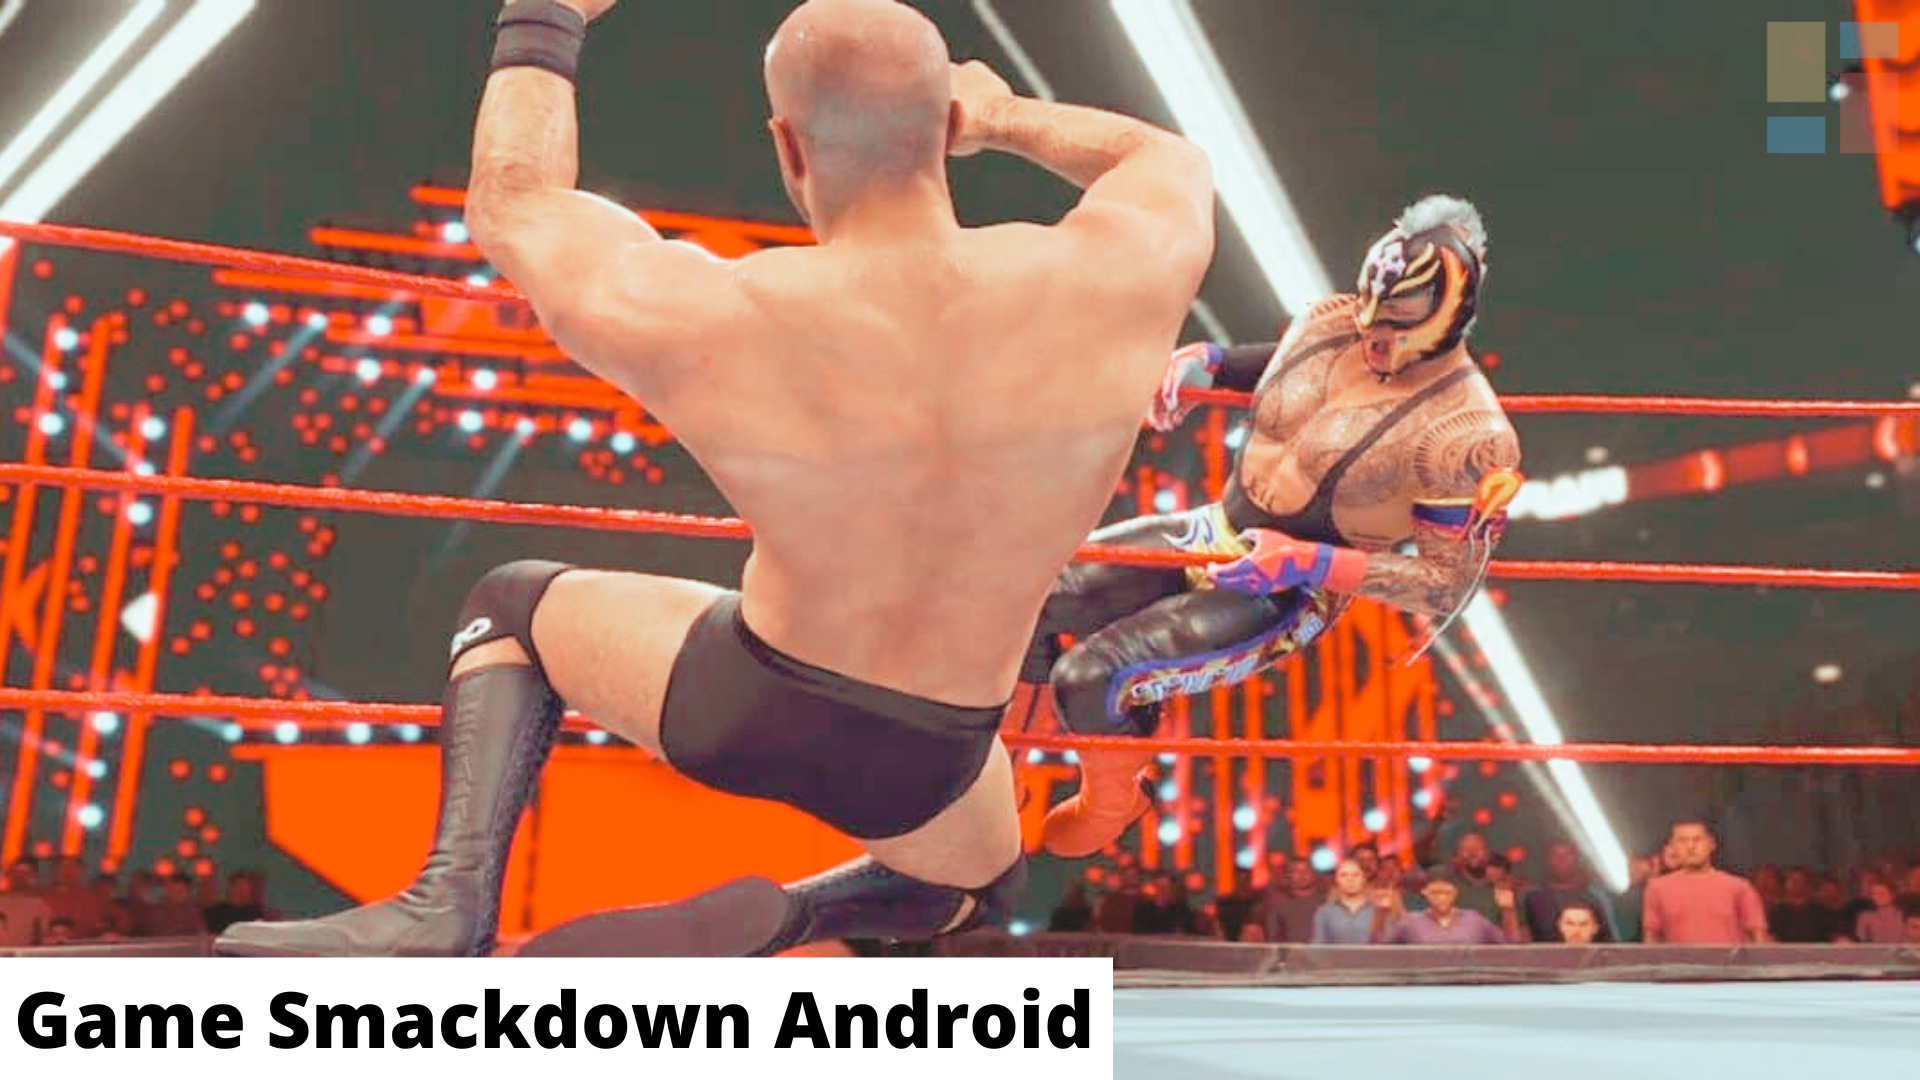 Game Smackdown Android